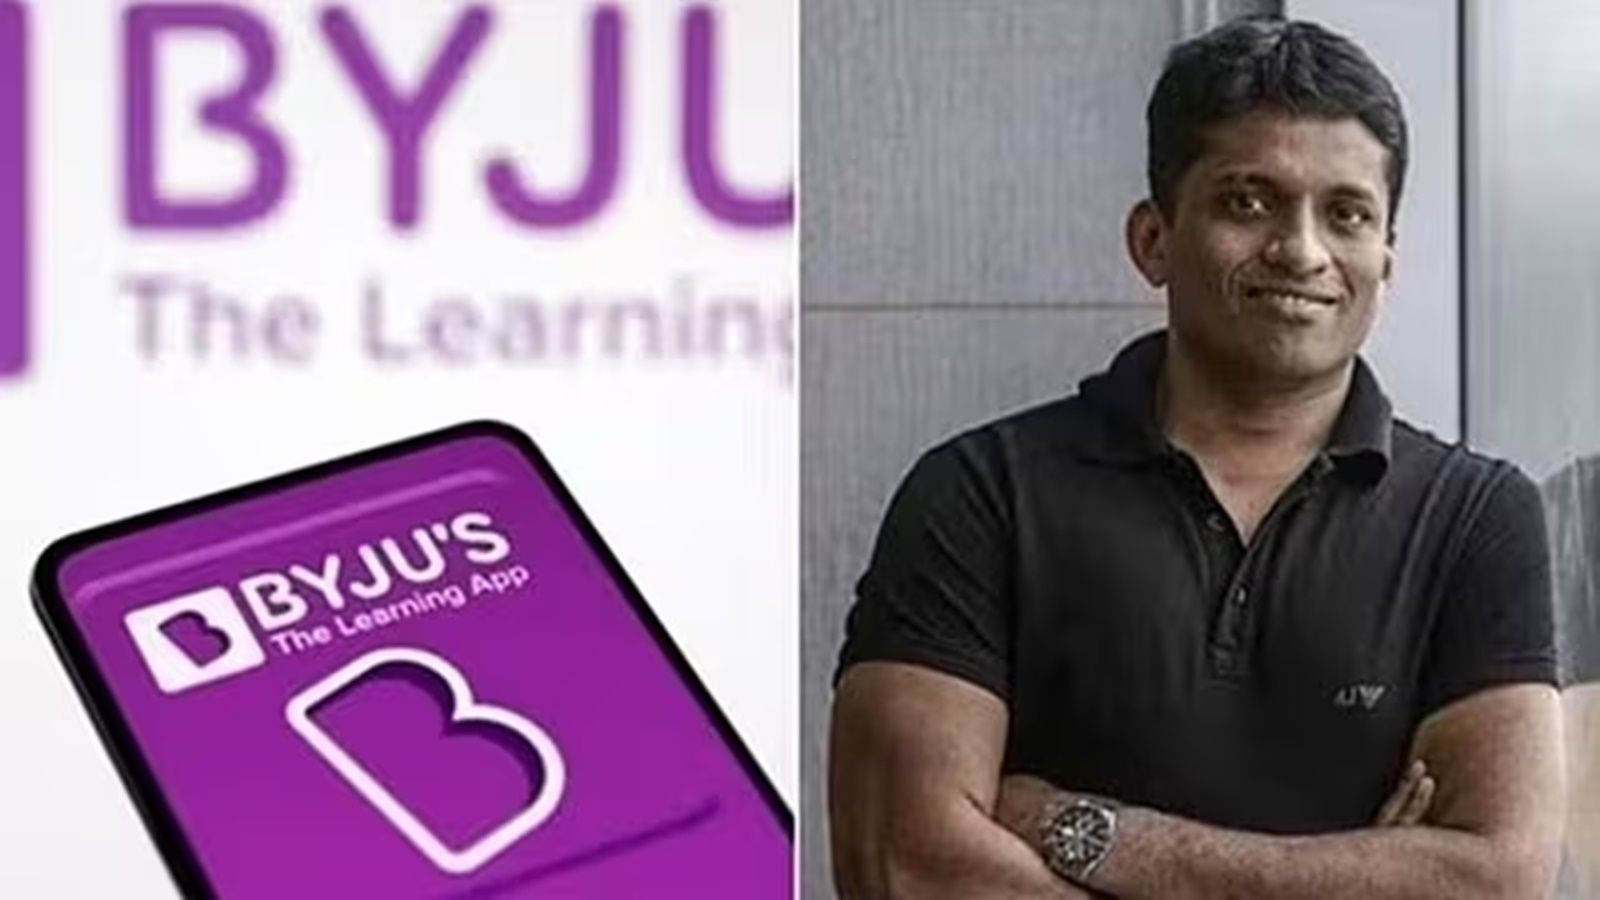 android, byju’s ceo raveendran says unable to pay salaries, lambasts investors for blocking funds